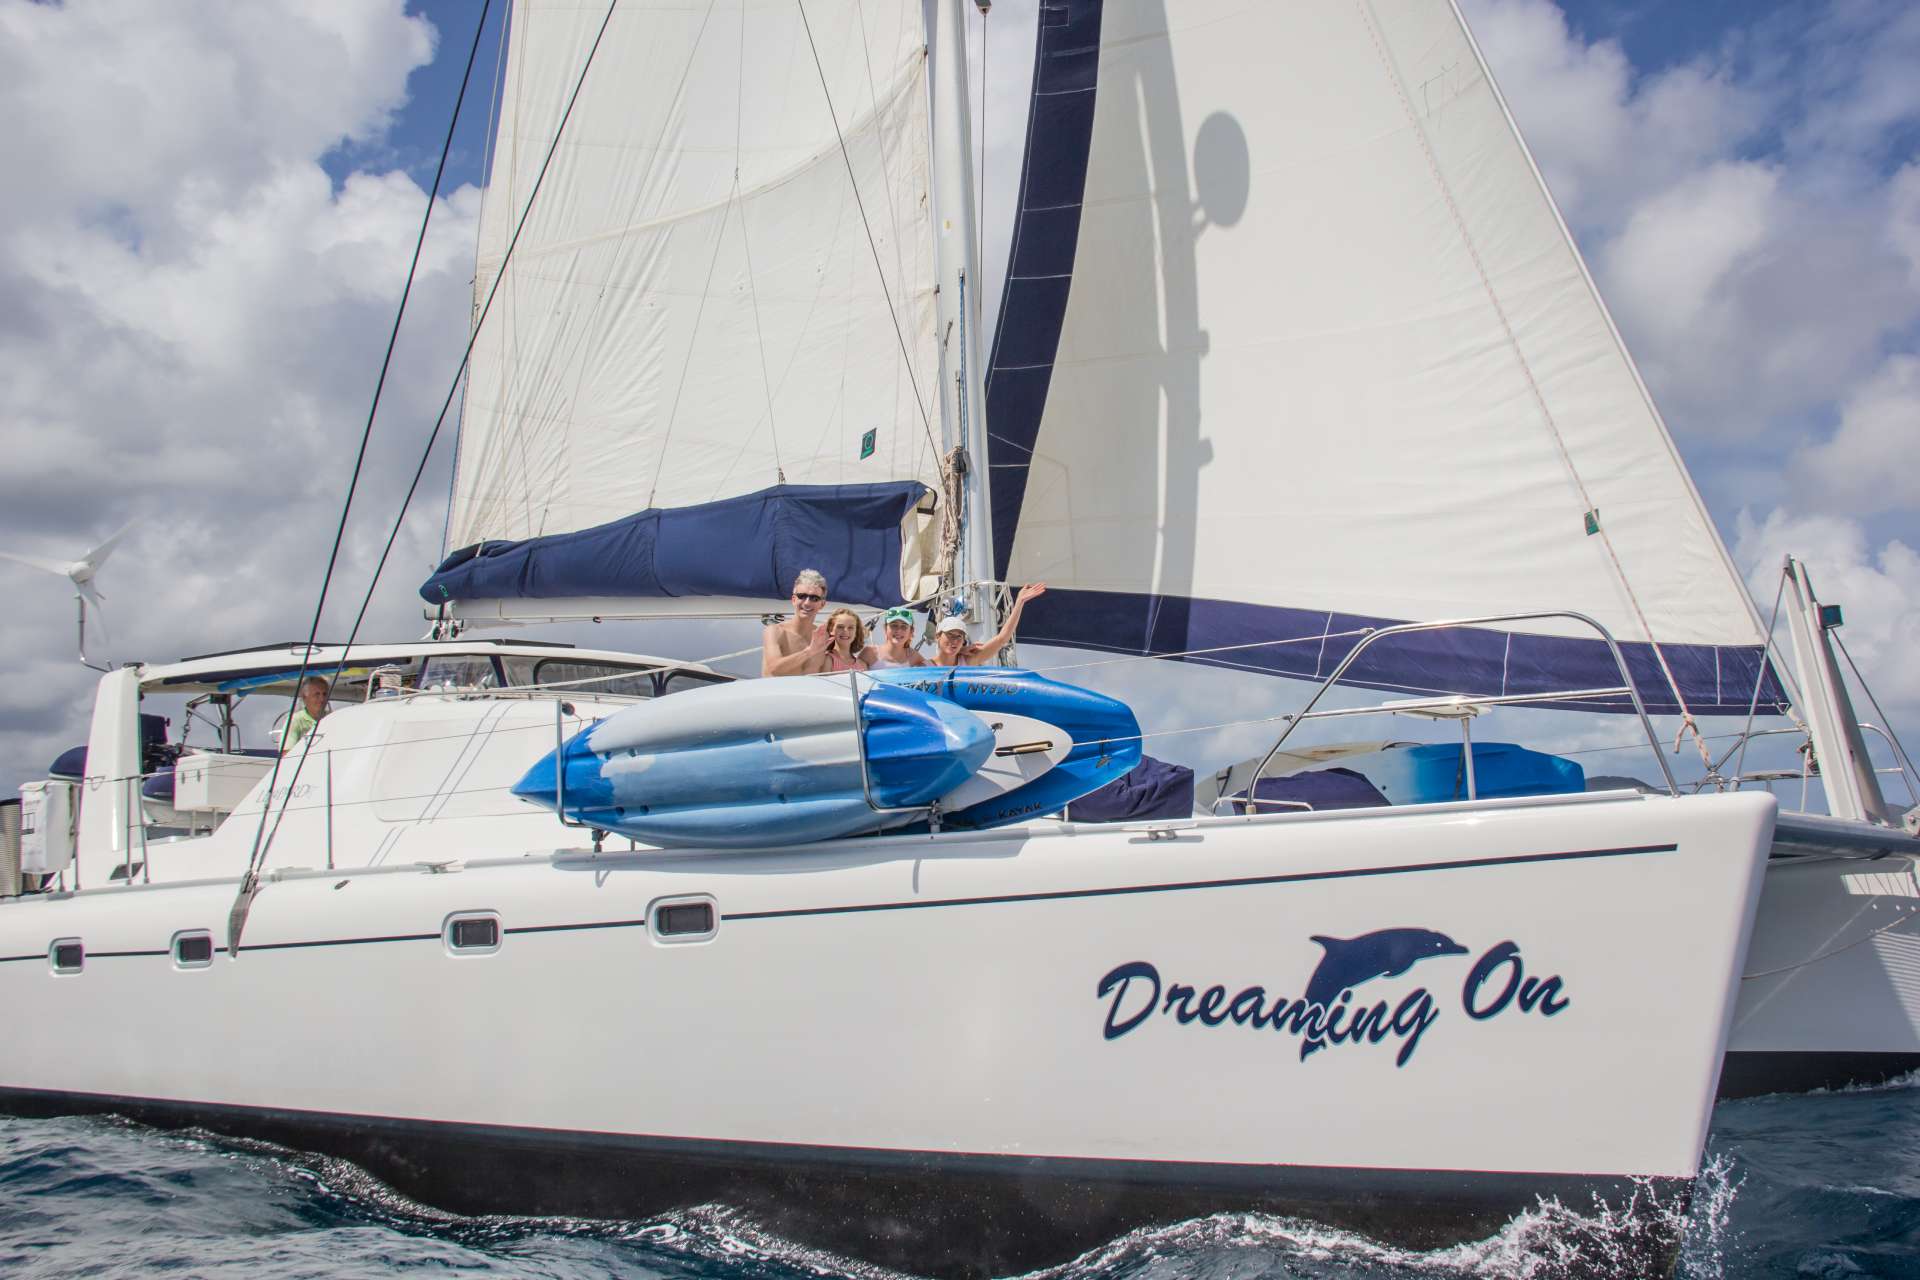 dreaming on - Yacht Charter Placencia & Boat hire in Central america, Belize 2